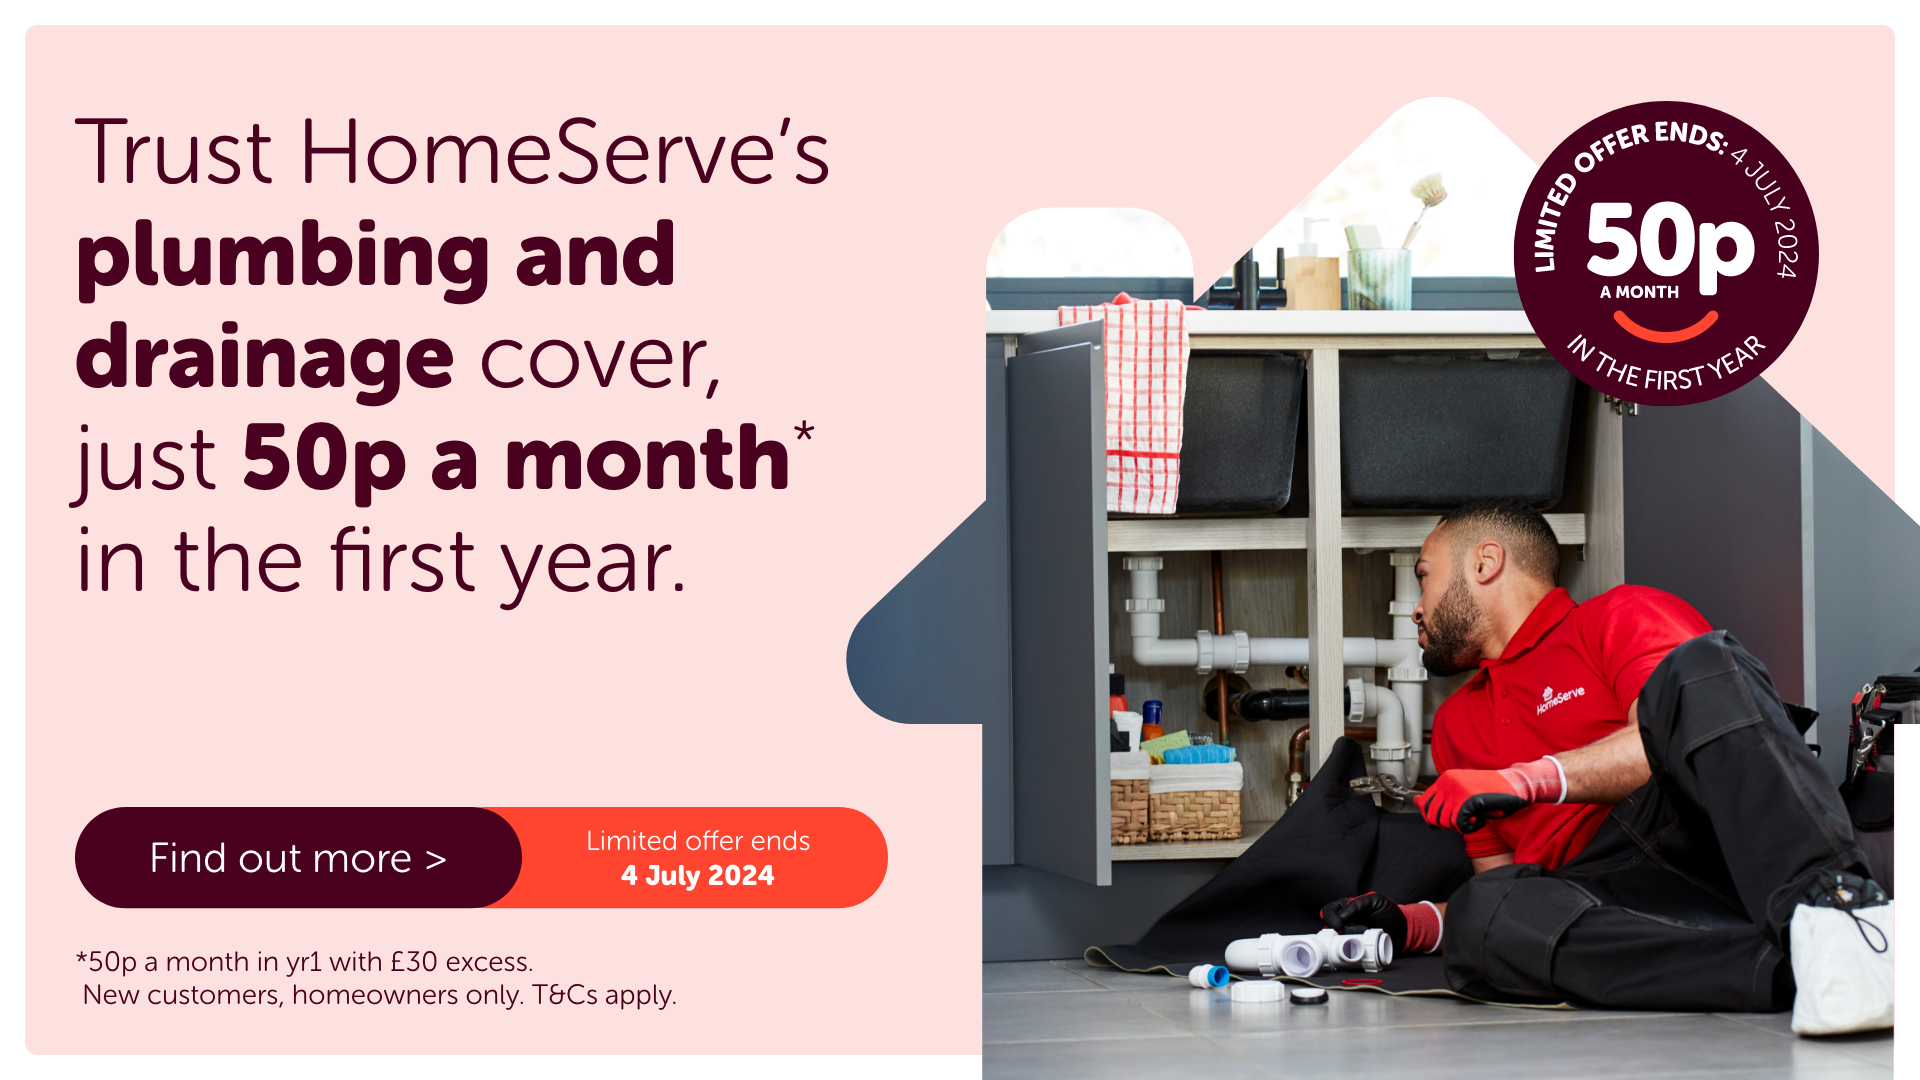 Trust Homeserve's plumbing and drainage cover from just 50p a month in the first year